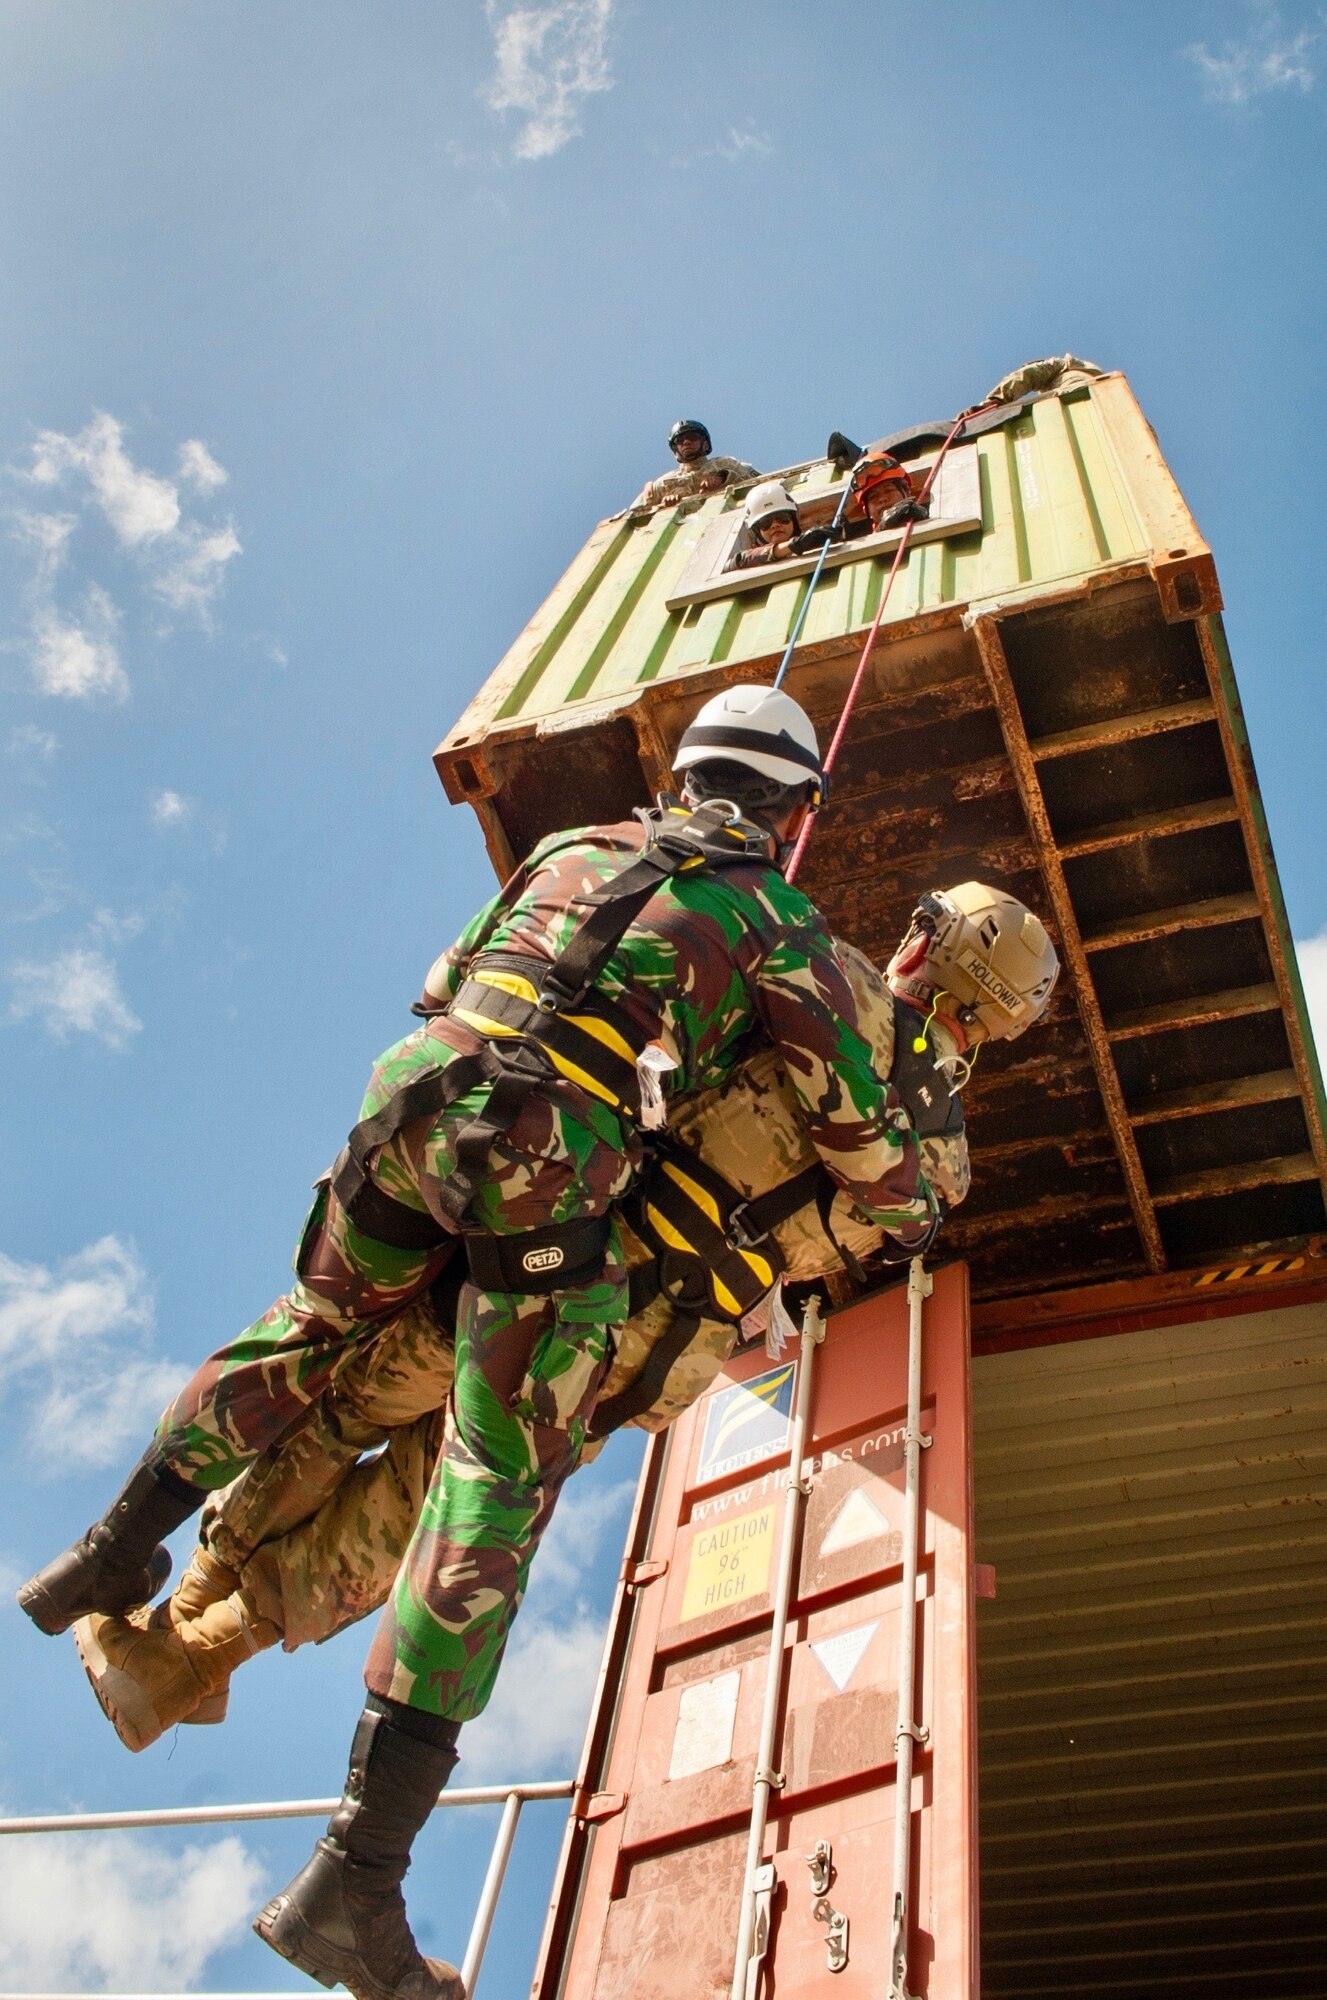 An Indonesian soldier assists a simulated wounded Hawaii Army National Guardsman as he repels from a second story building during a Combined - Multinational Task Force [CTF 501] search and extraction training scenario on July 18, 2019 at Kalaeloa Urban Search and Rescue Training area, Hawaii. Service members from the Philippines, Indonesia, Bangladesh, Vietnam, Oregon Air National Guard traveled to Hawaii as part of a State Partnership Program training event.